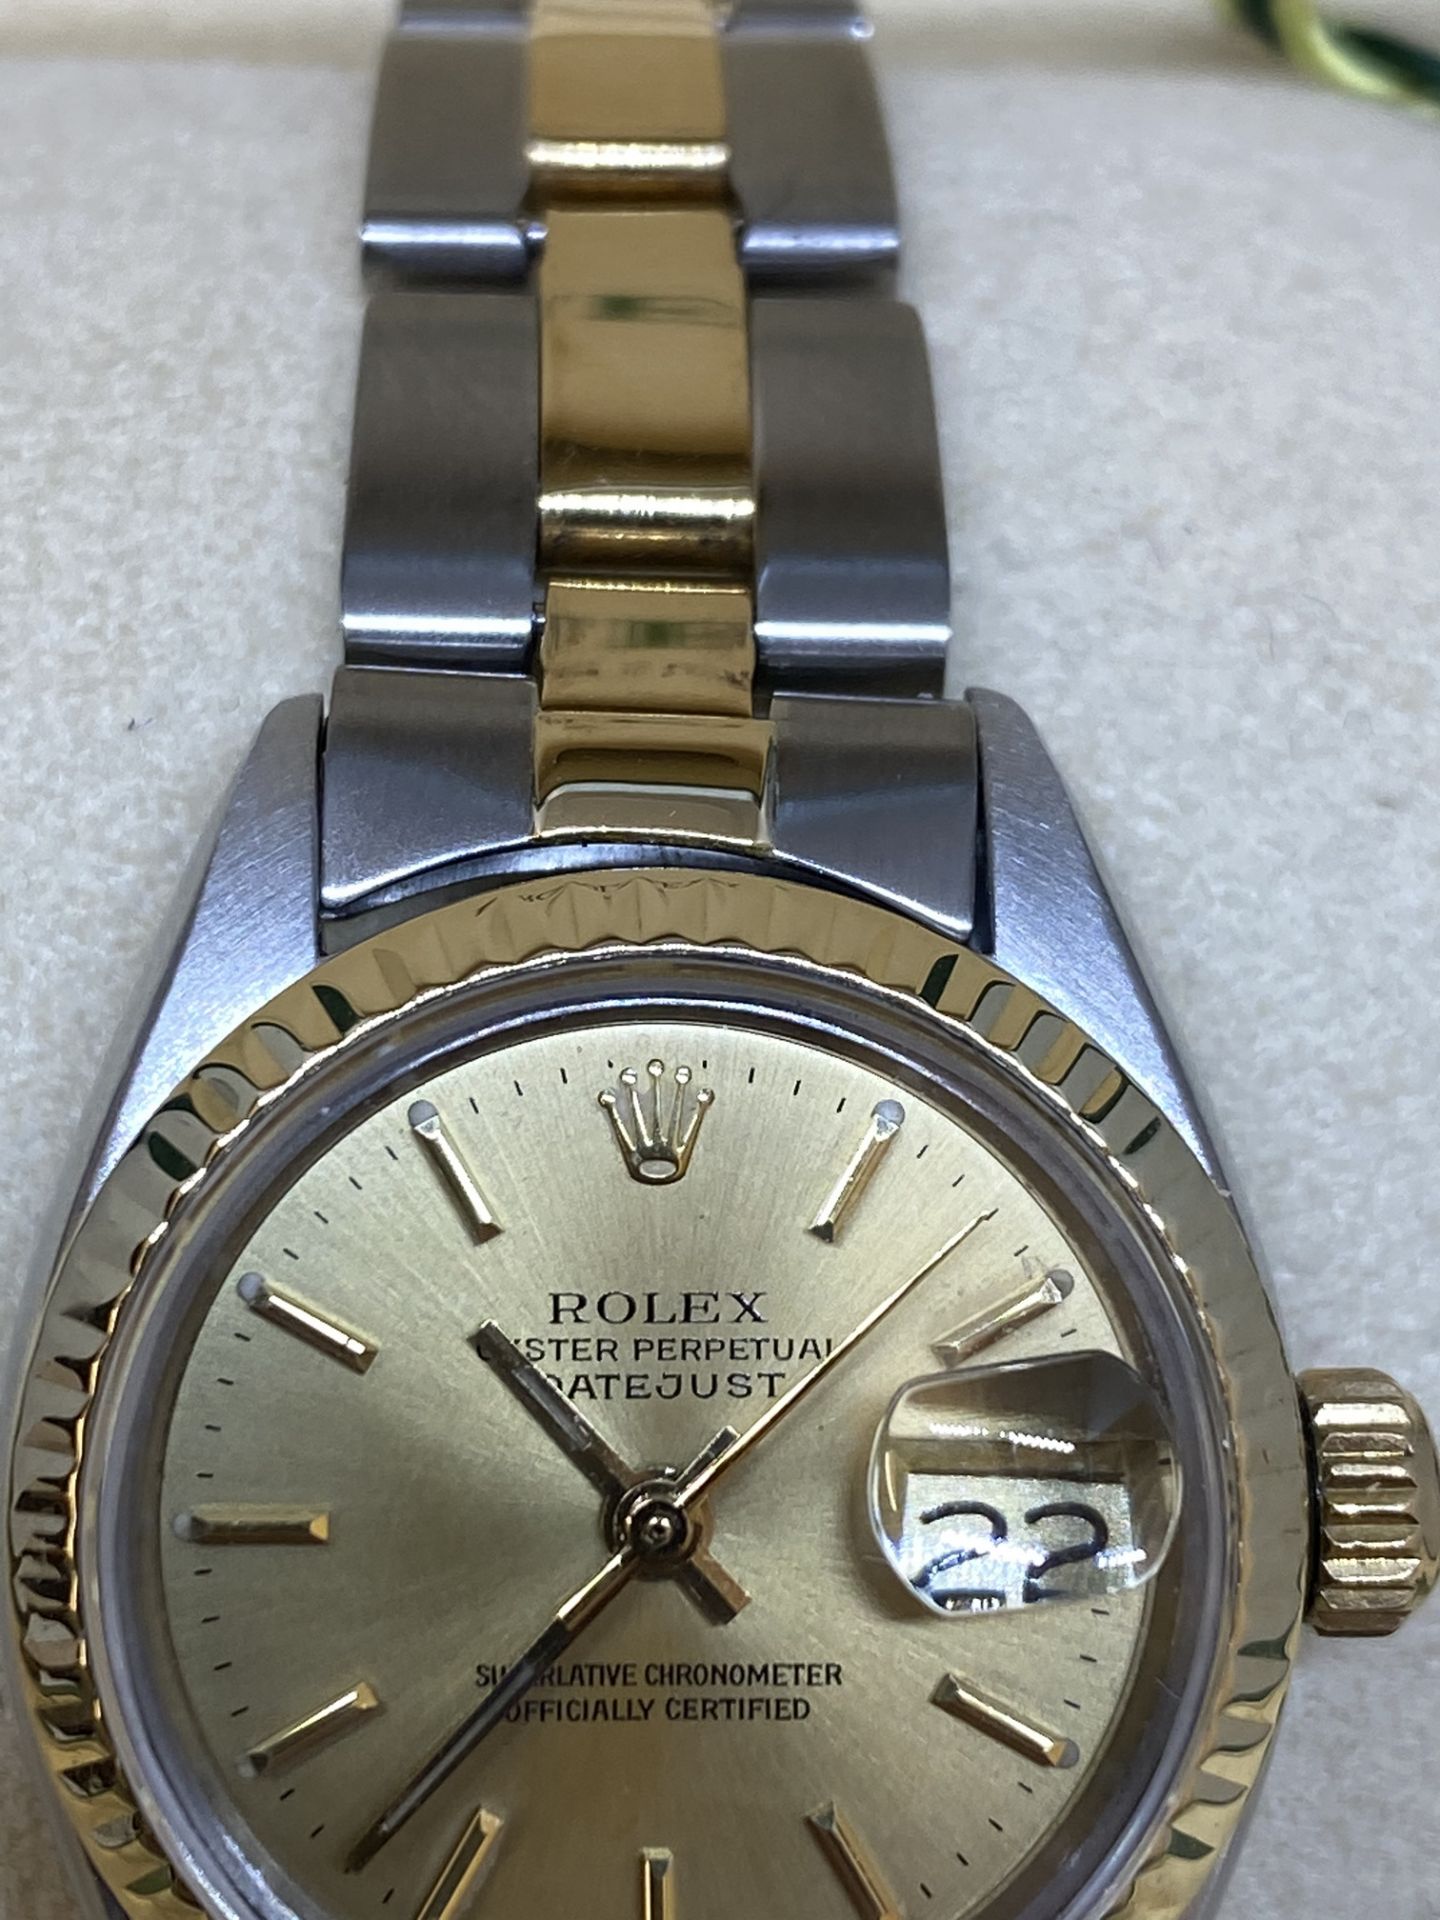 Rolex Steel & Gold Ladies Watch 6917 with Box - Image 7 of 11